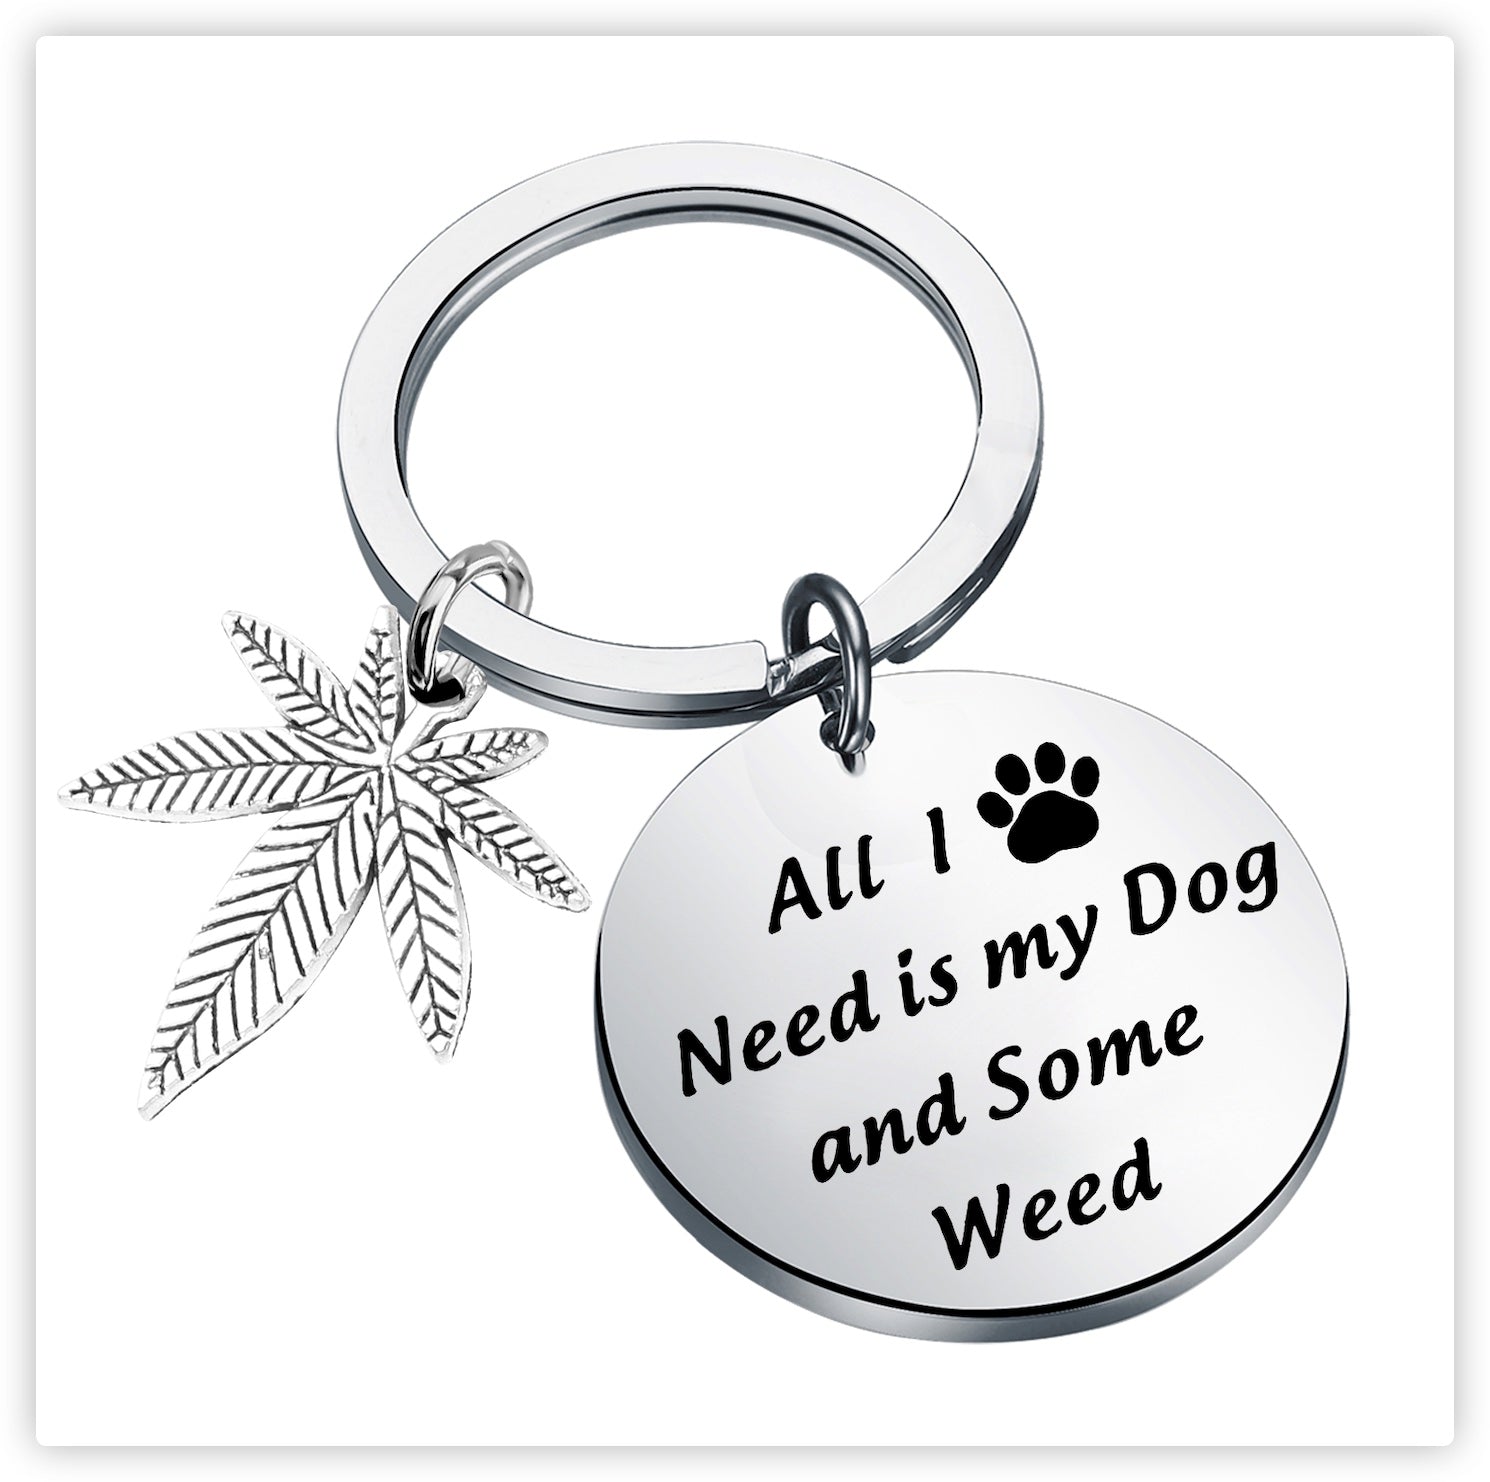 Cannabis Dog Cat Lover Gift Cannabis Weed Gift All I Need is Dog/Cat and Some Weed